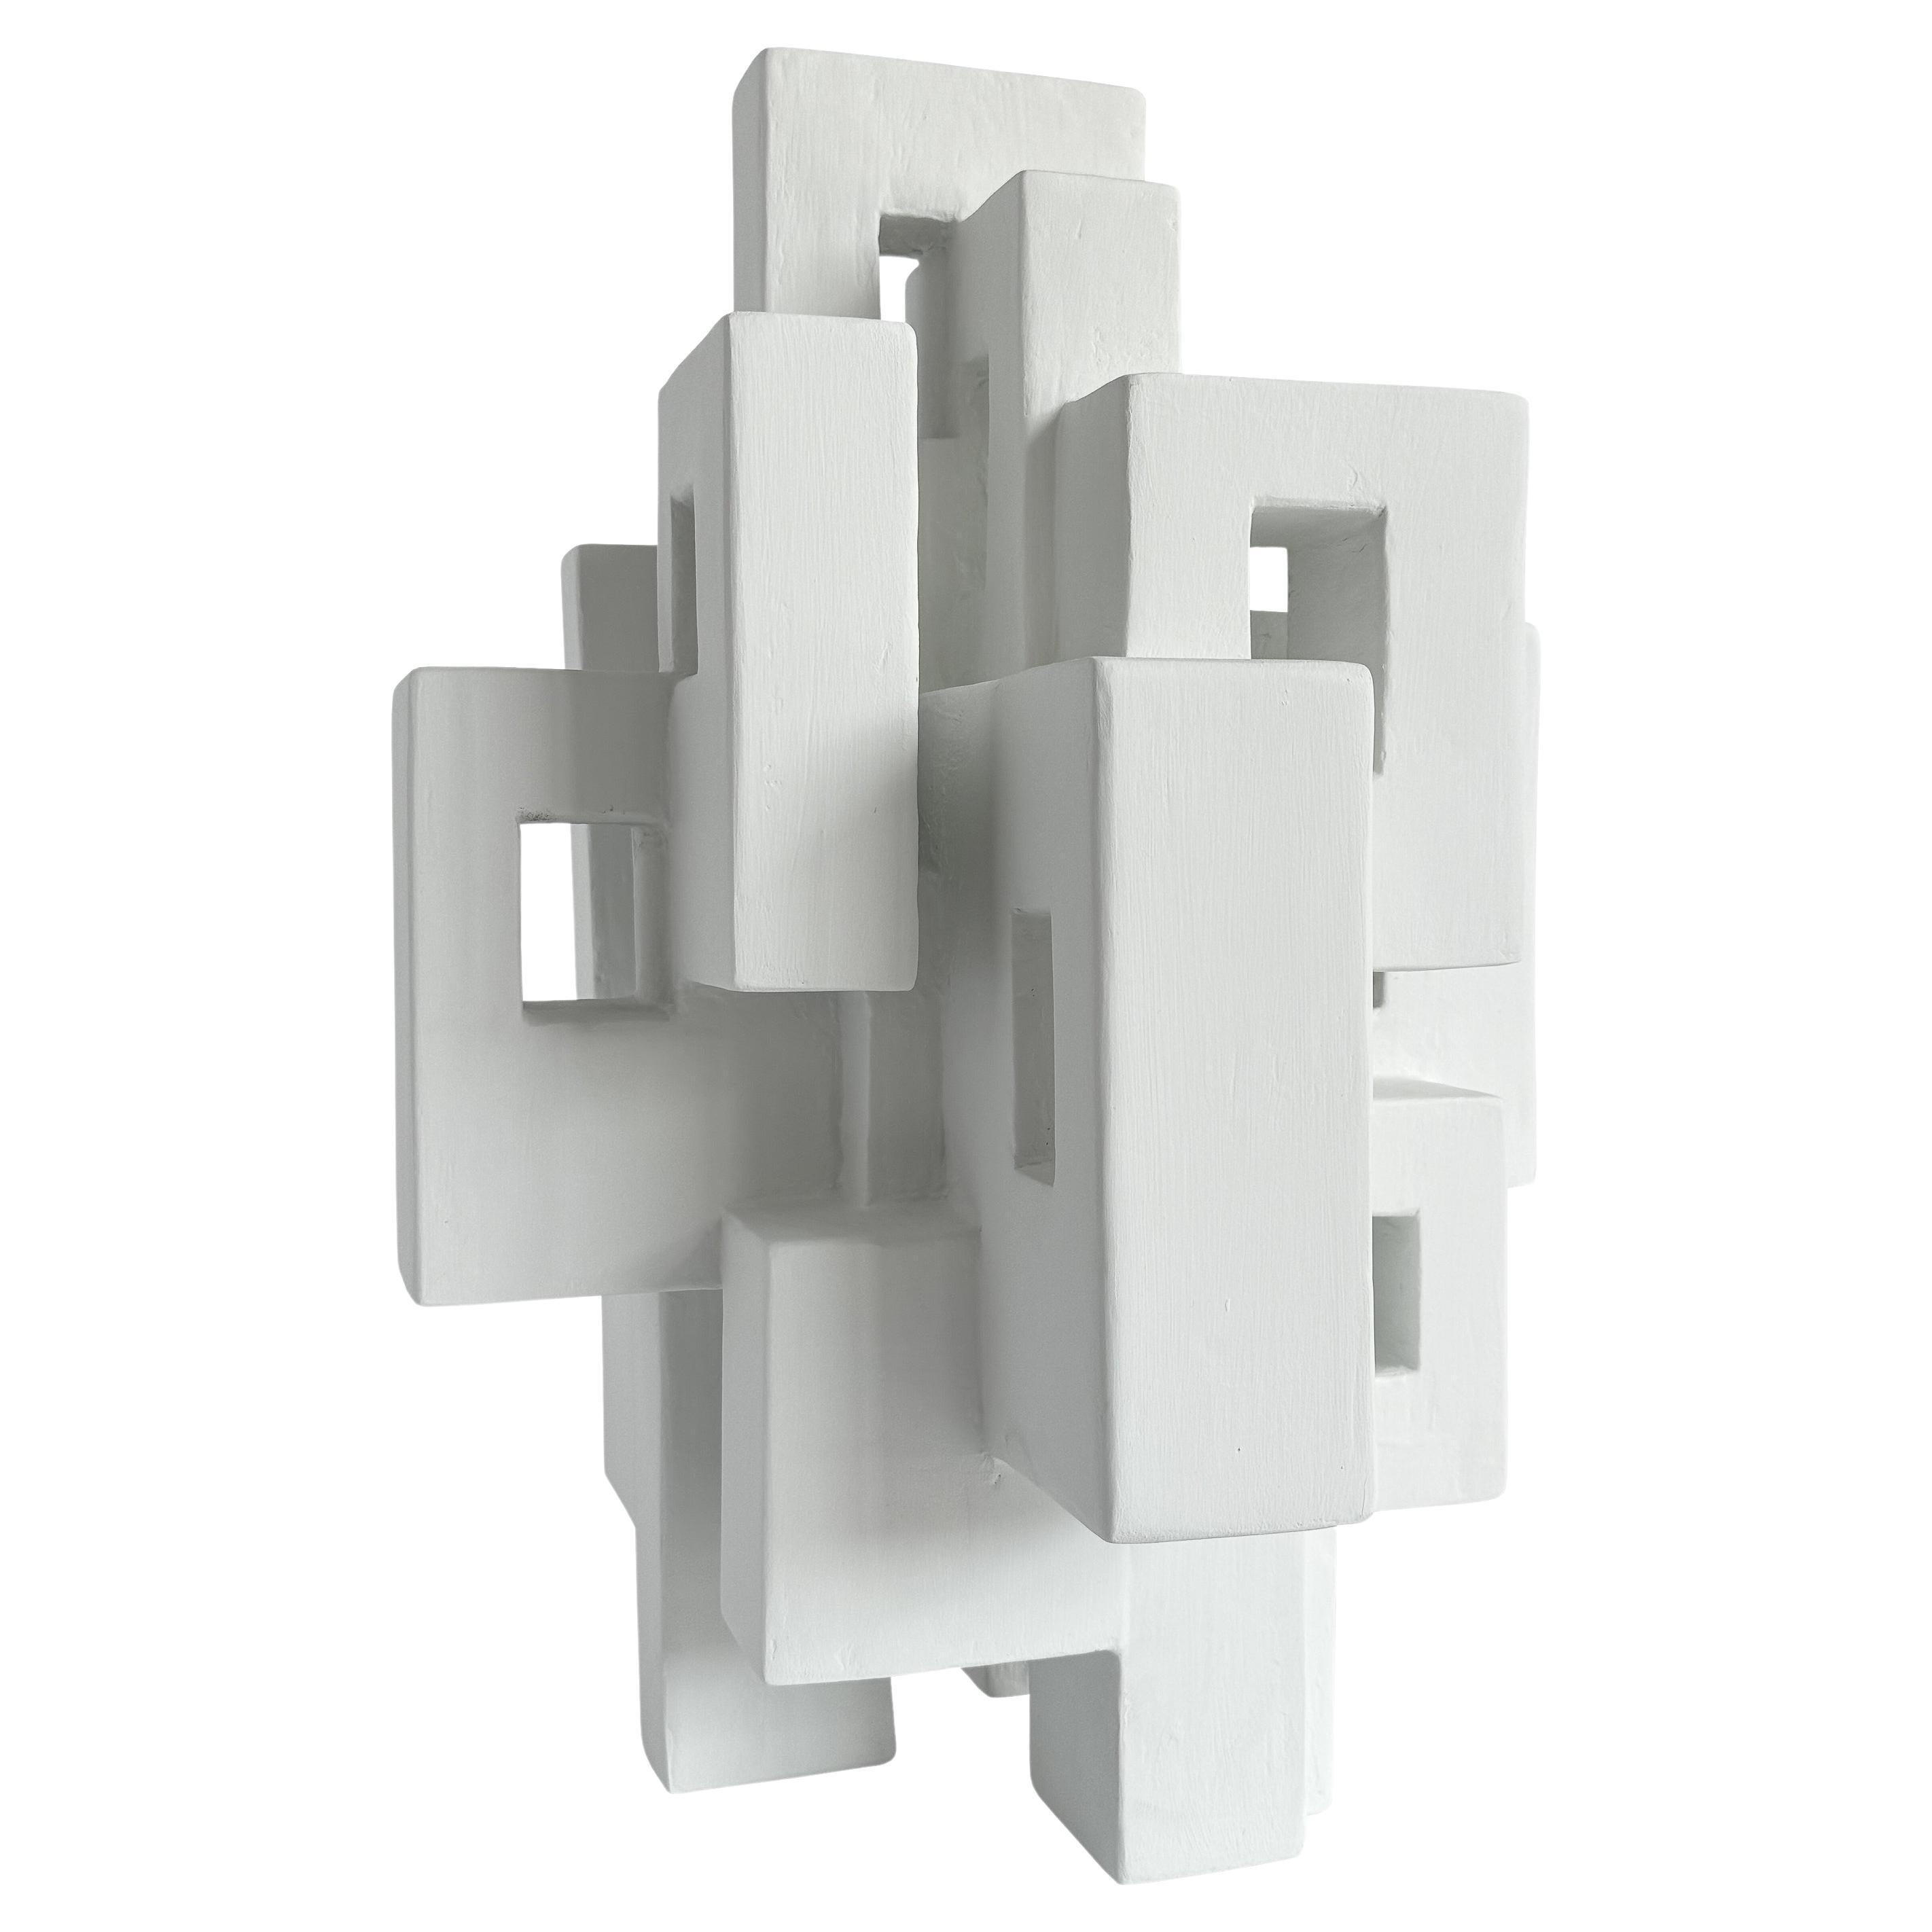 "Kenzo" Geometric Abstract Sculpture by Dan Schneiger For Sale